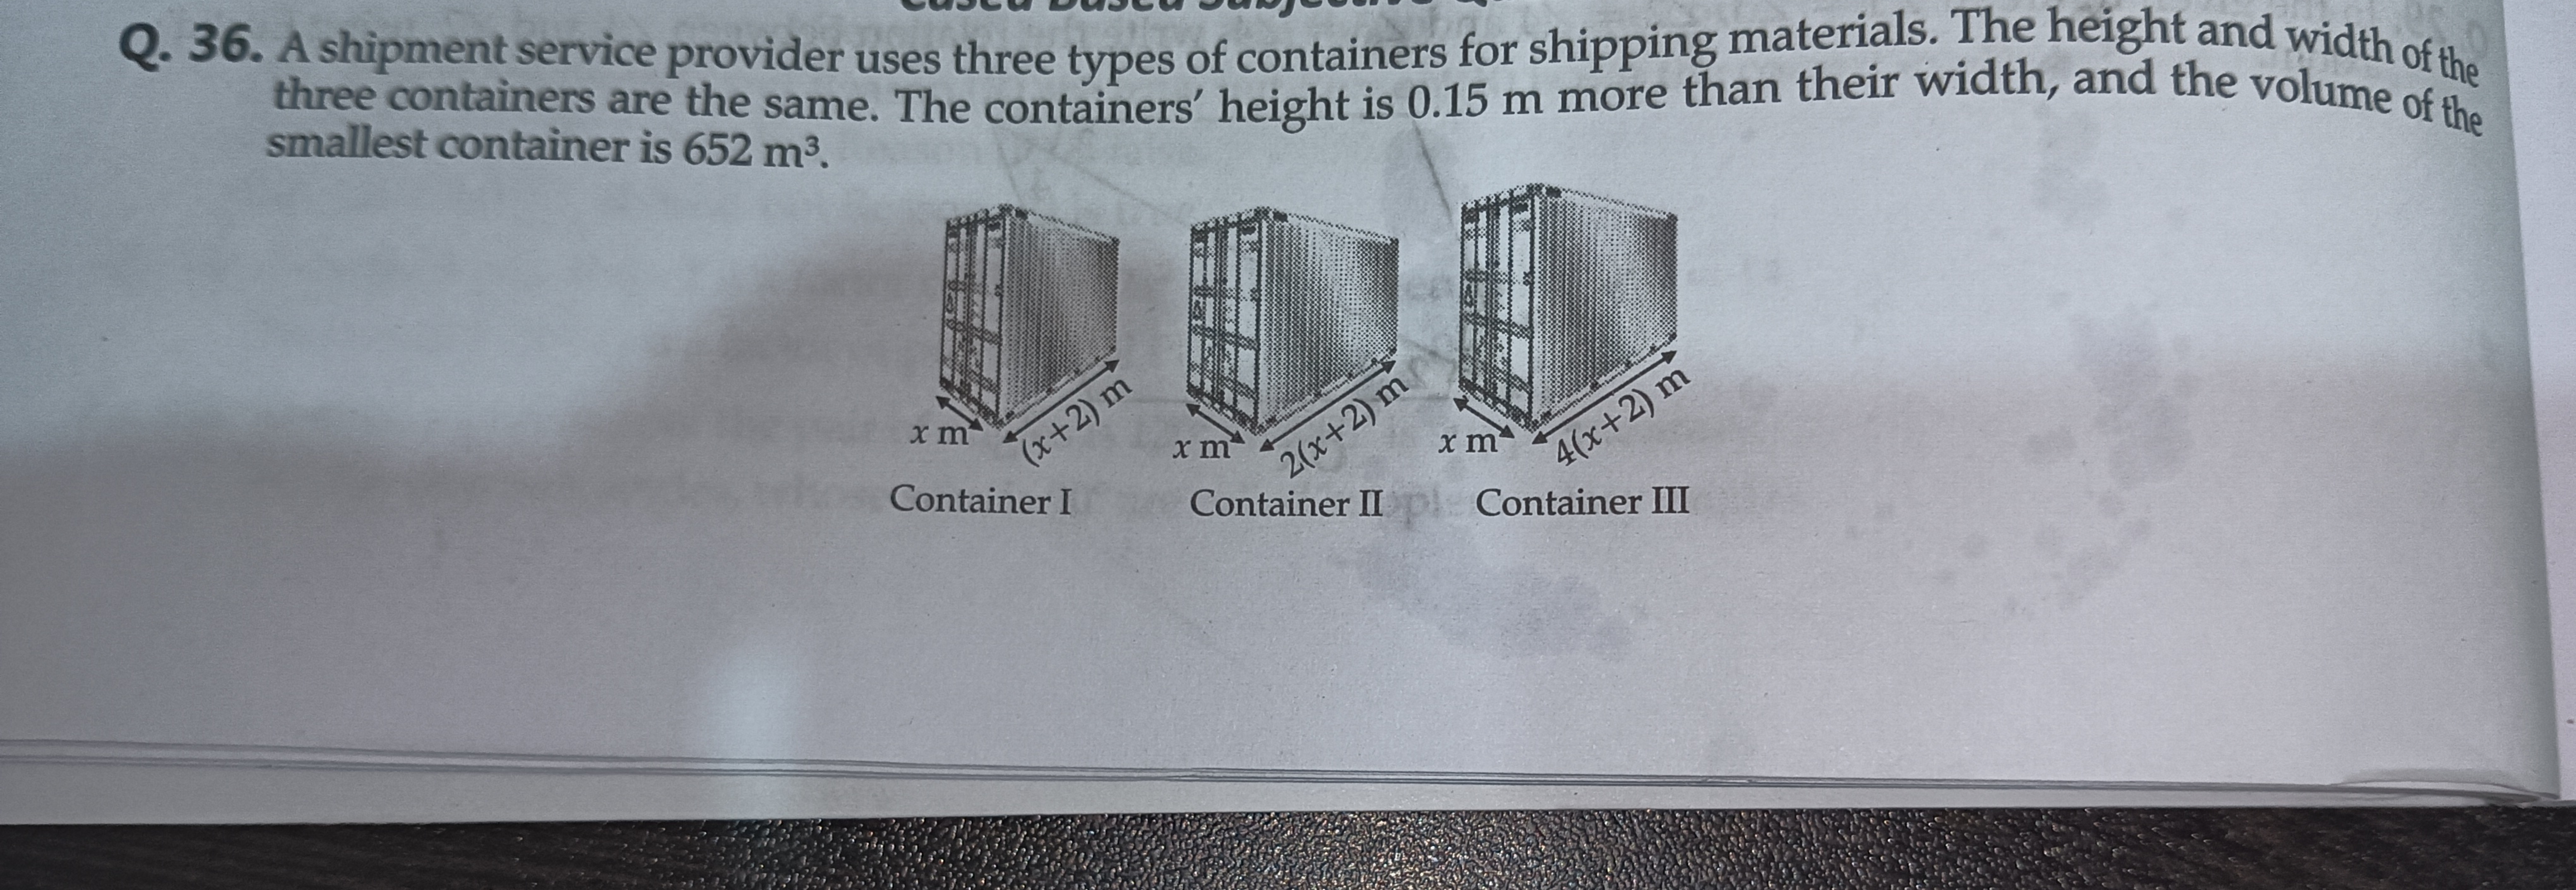 Q. 36. A shipment service provider uses three types of containers for 